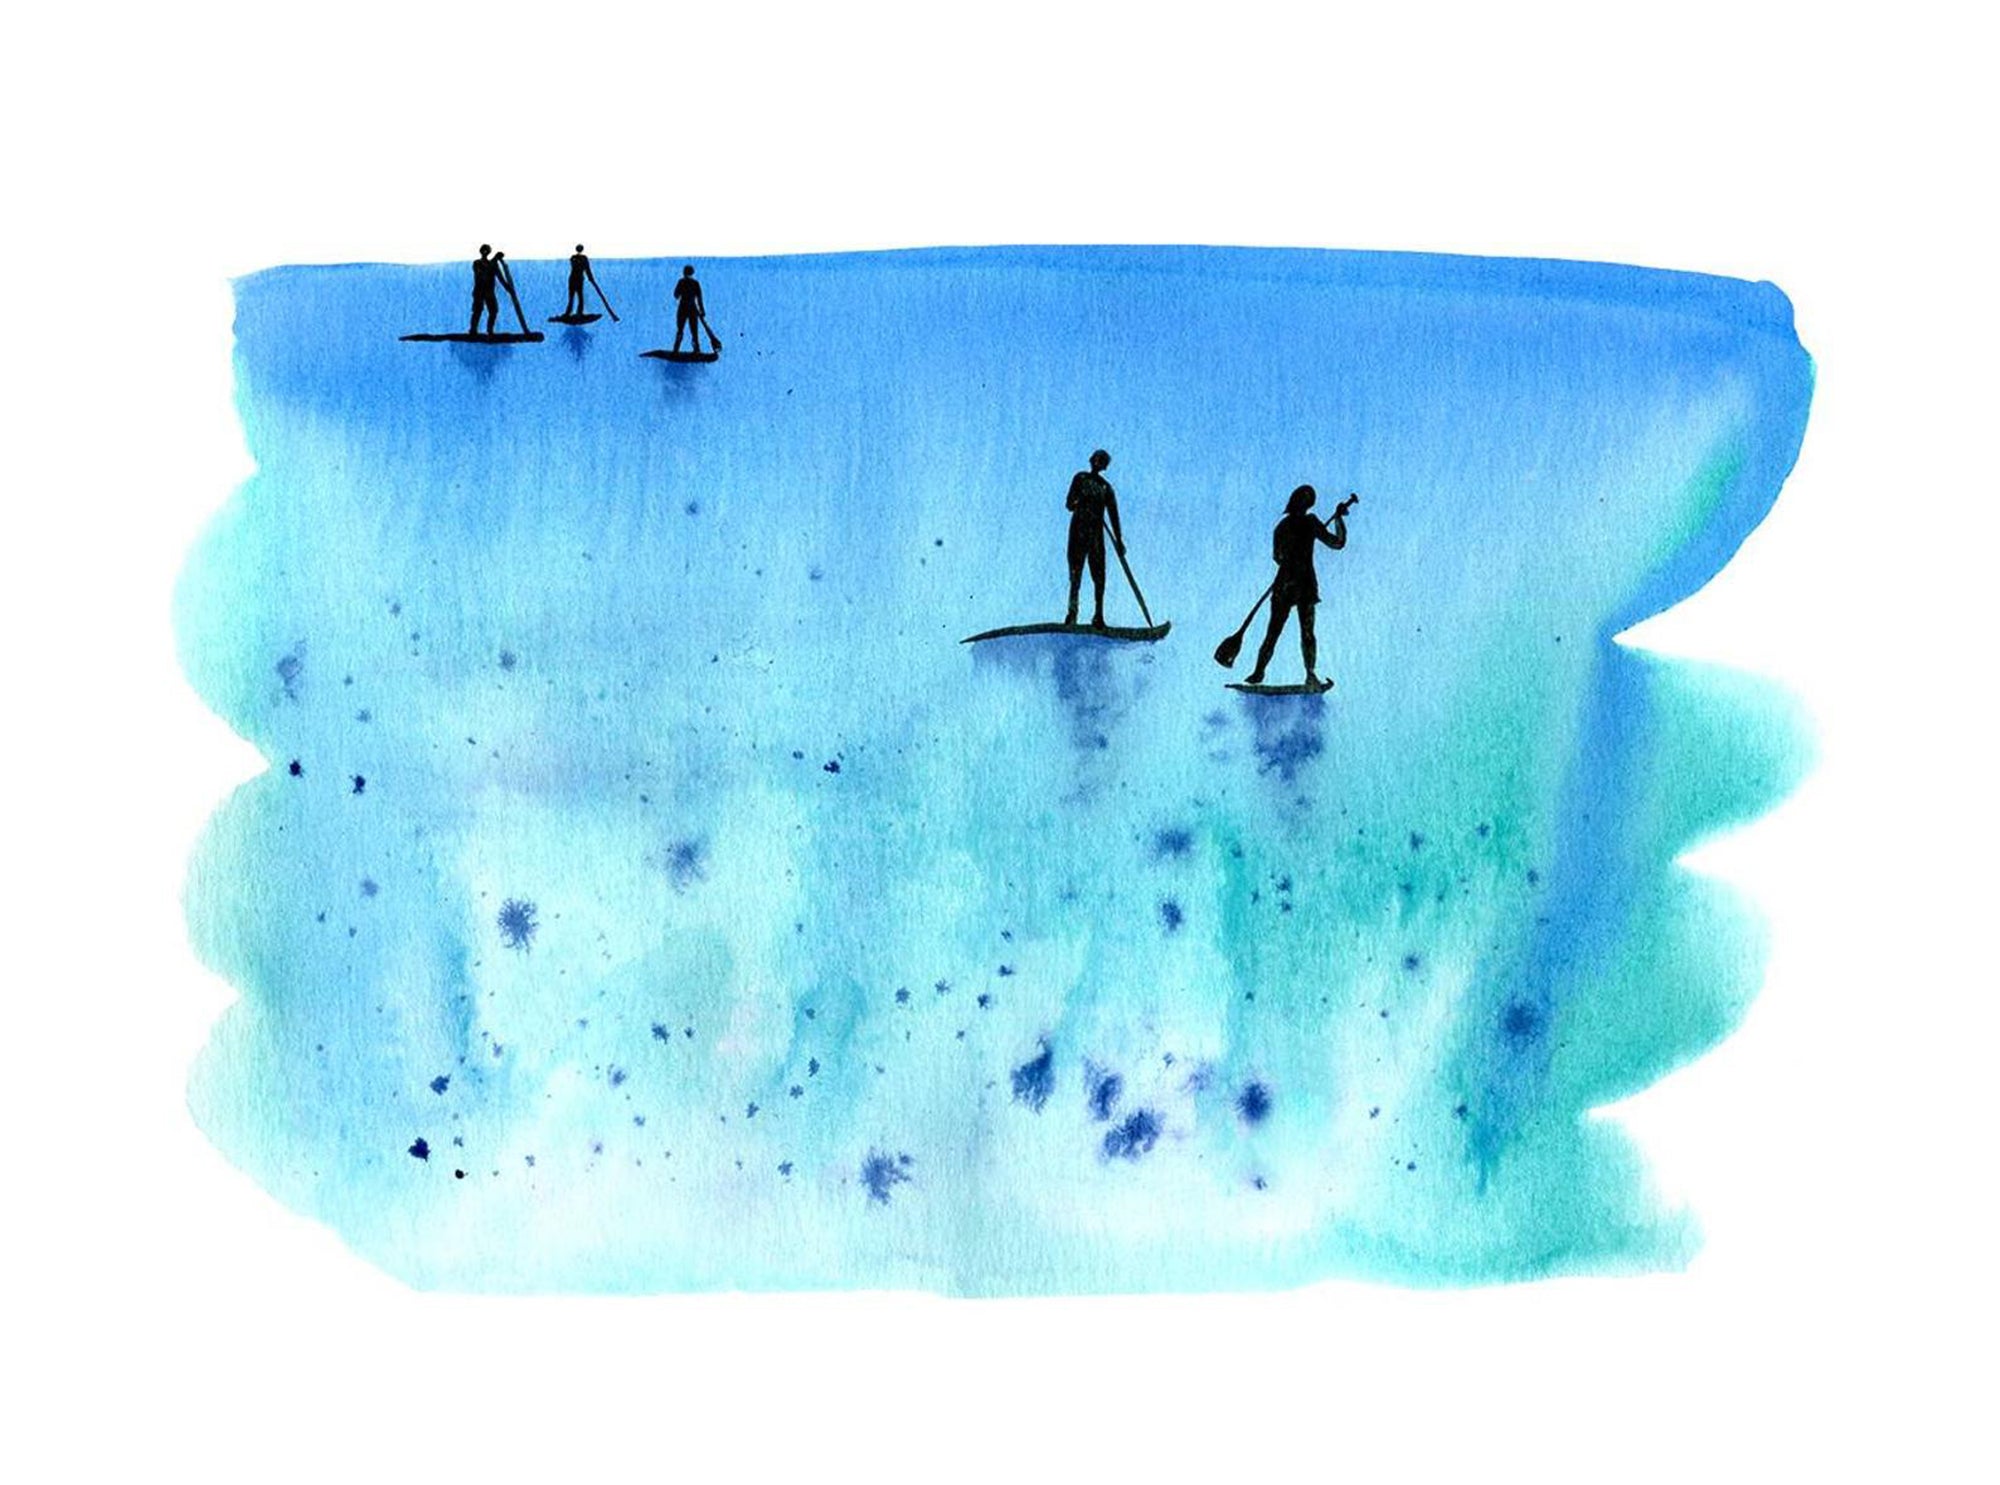 Paddle boarding in blue greetings card